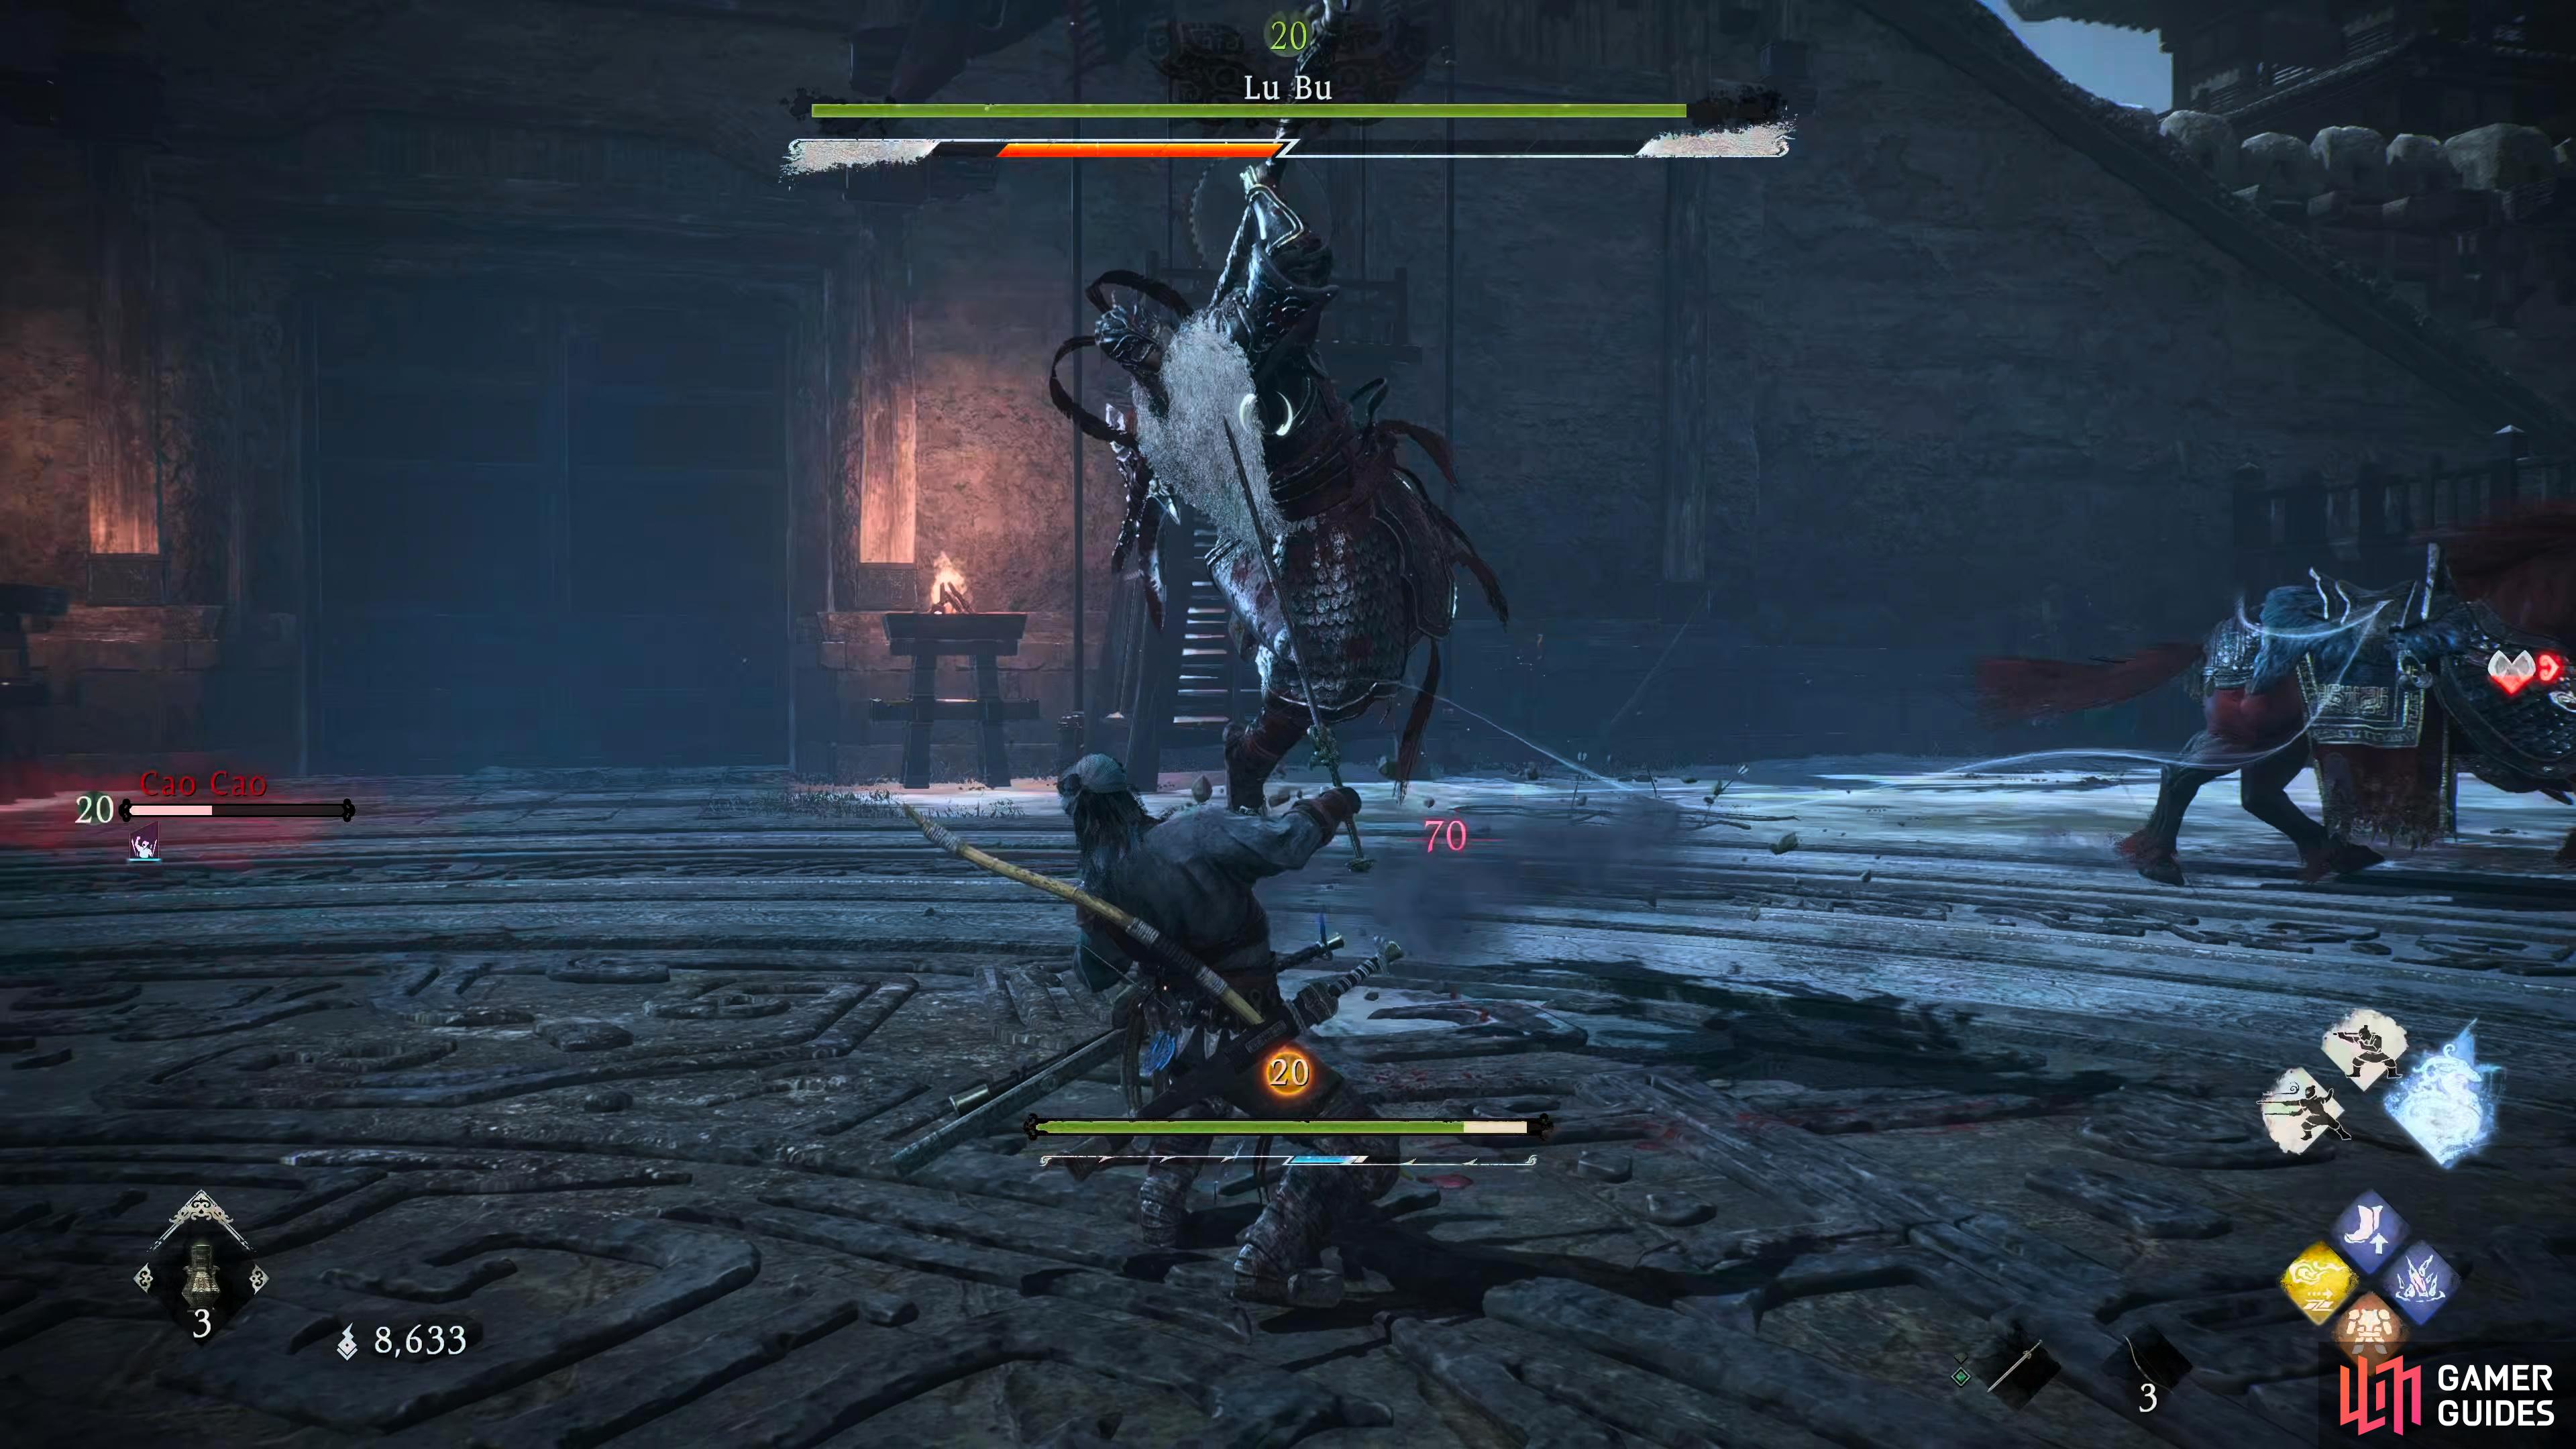 Lu Bu will leap at you and slam down his weapon.  You can deflect and counter this with a spirit attack.